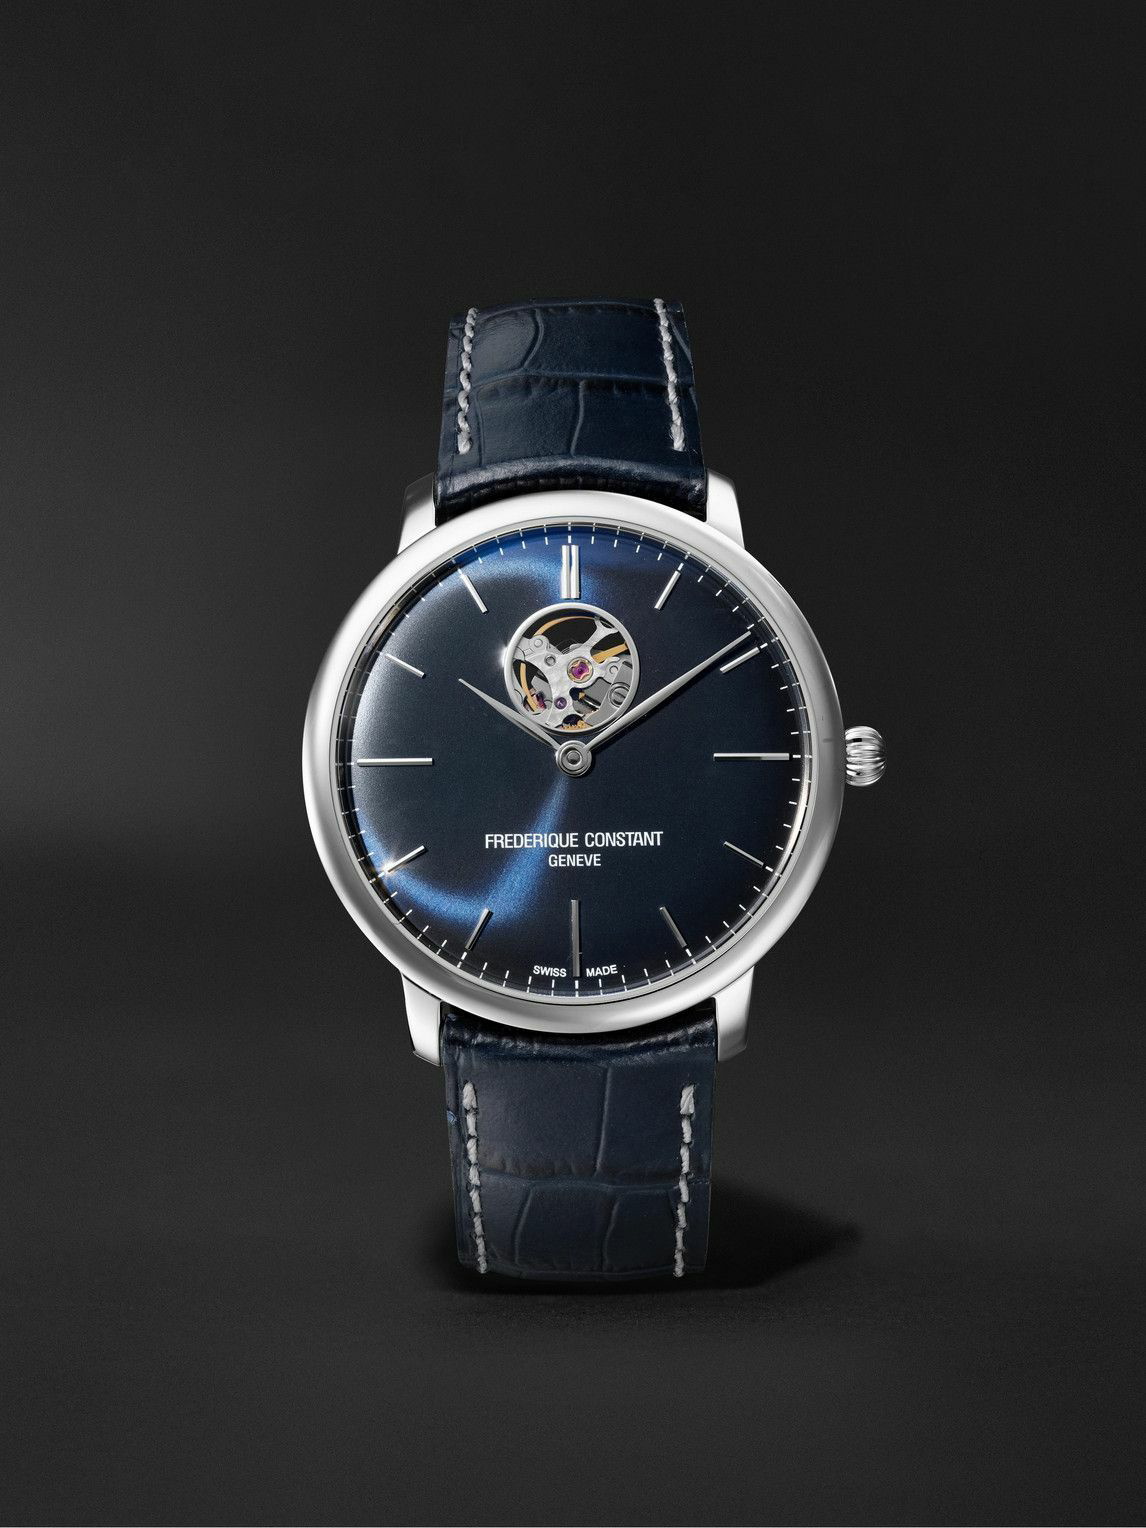 Venture bud have på Frederique Constant - Slimline Heart Beat Automatic 40mm Stainless Steel  and Croc-Effect Leather Watch, Ref. No. FC-312N4S6 - Blue Frederique  Constant